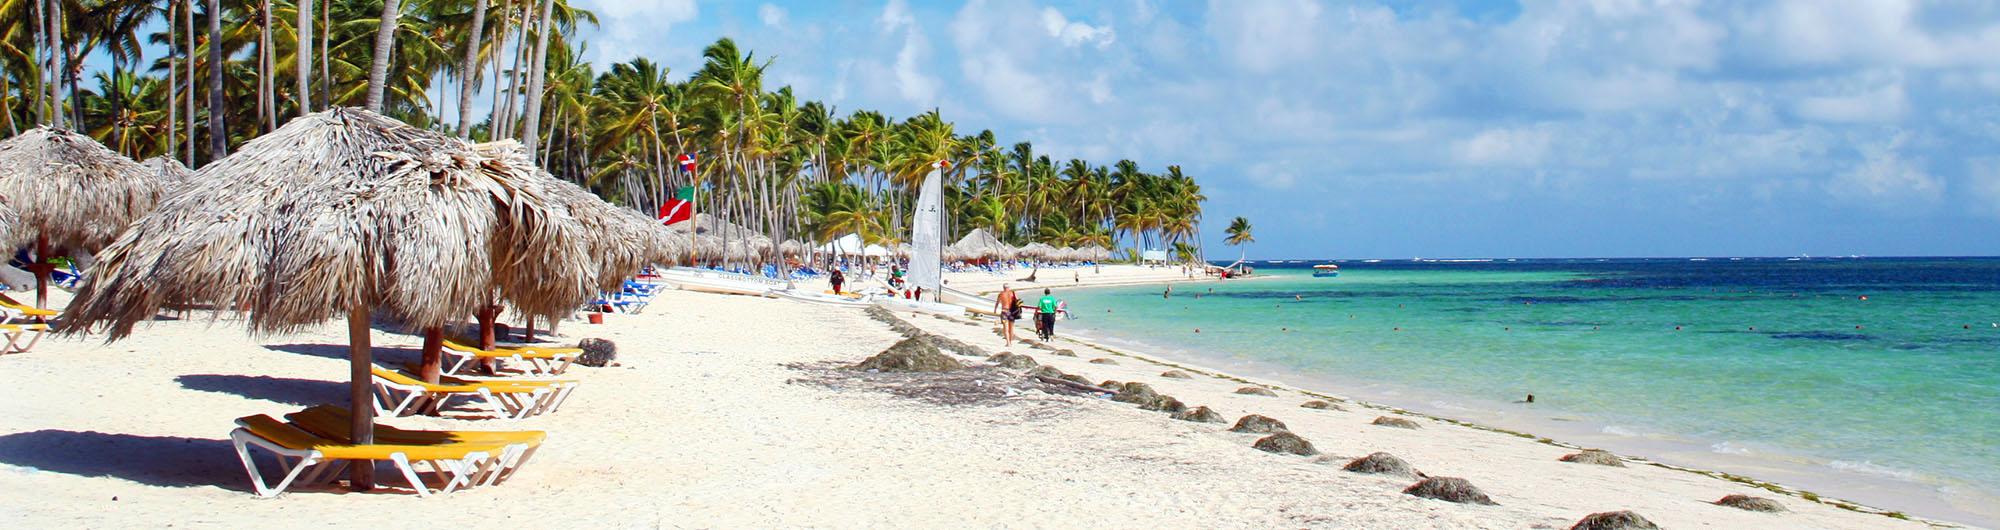 Search and compare cheap flights from Medellín to Punta Cana